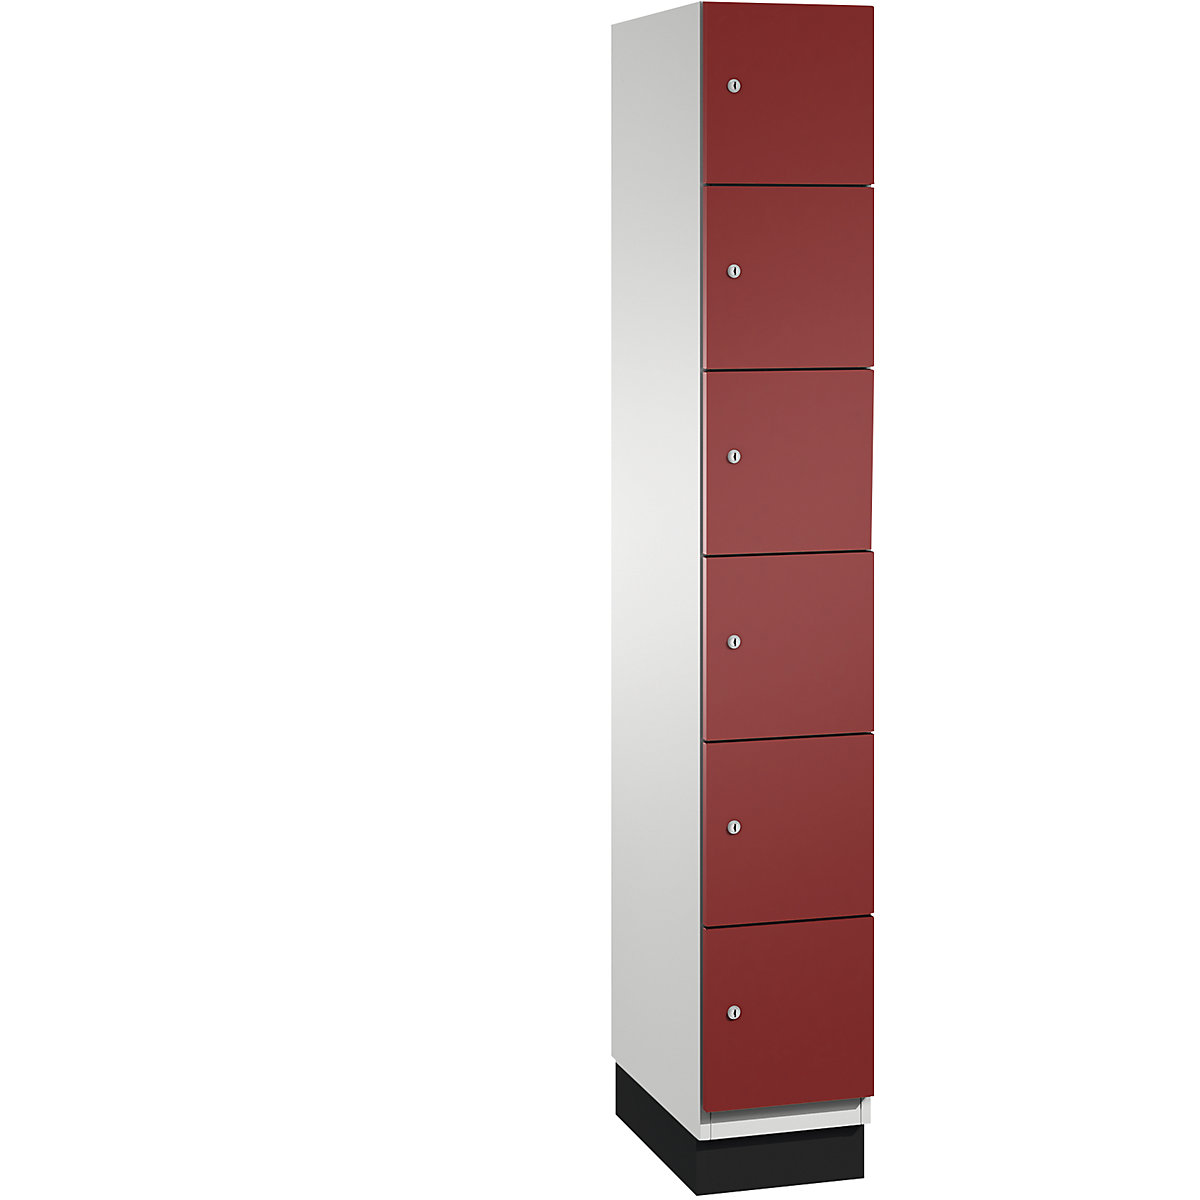 CAMBIO compartment locker with sheet steel doors – C+P, 6 compartments, width 300 mm, body light grey / door ruby red-11